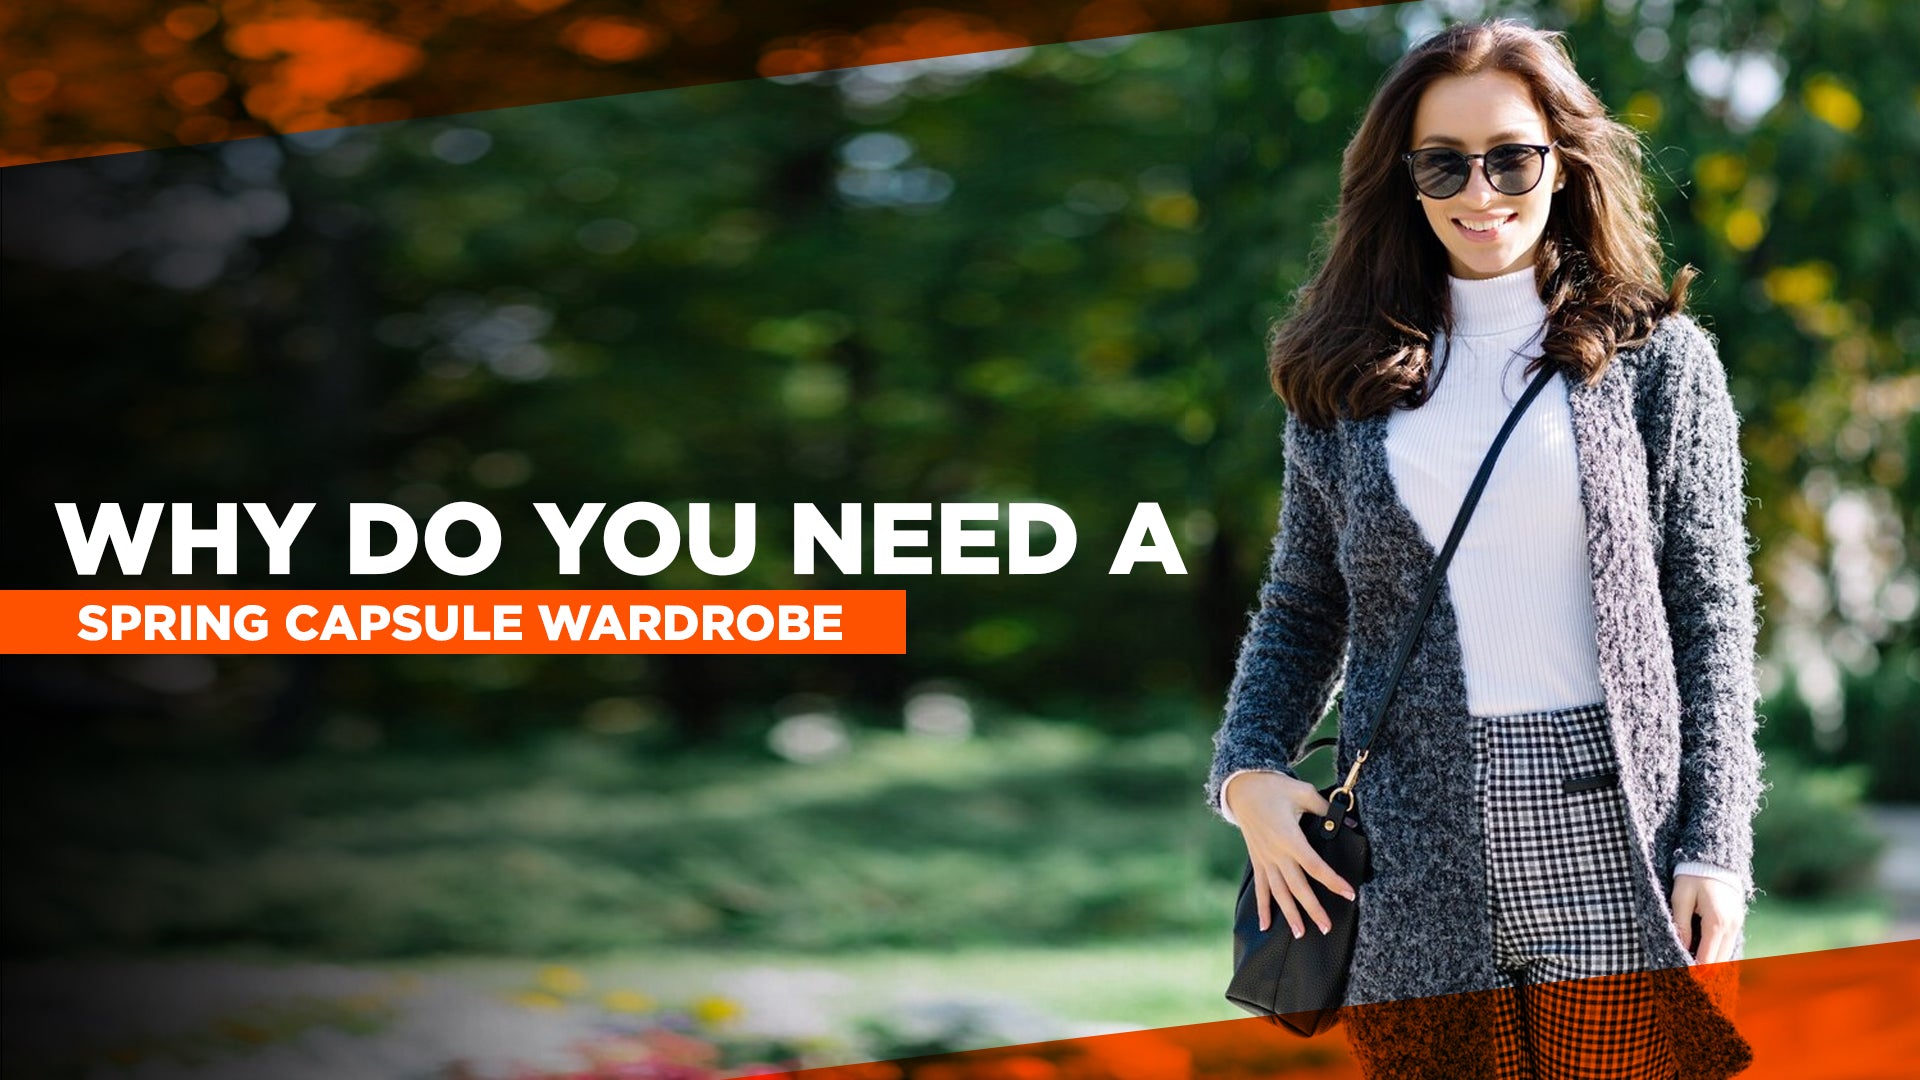 Why Do You Need A Spring Capsule Wardrobe?